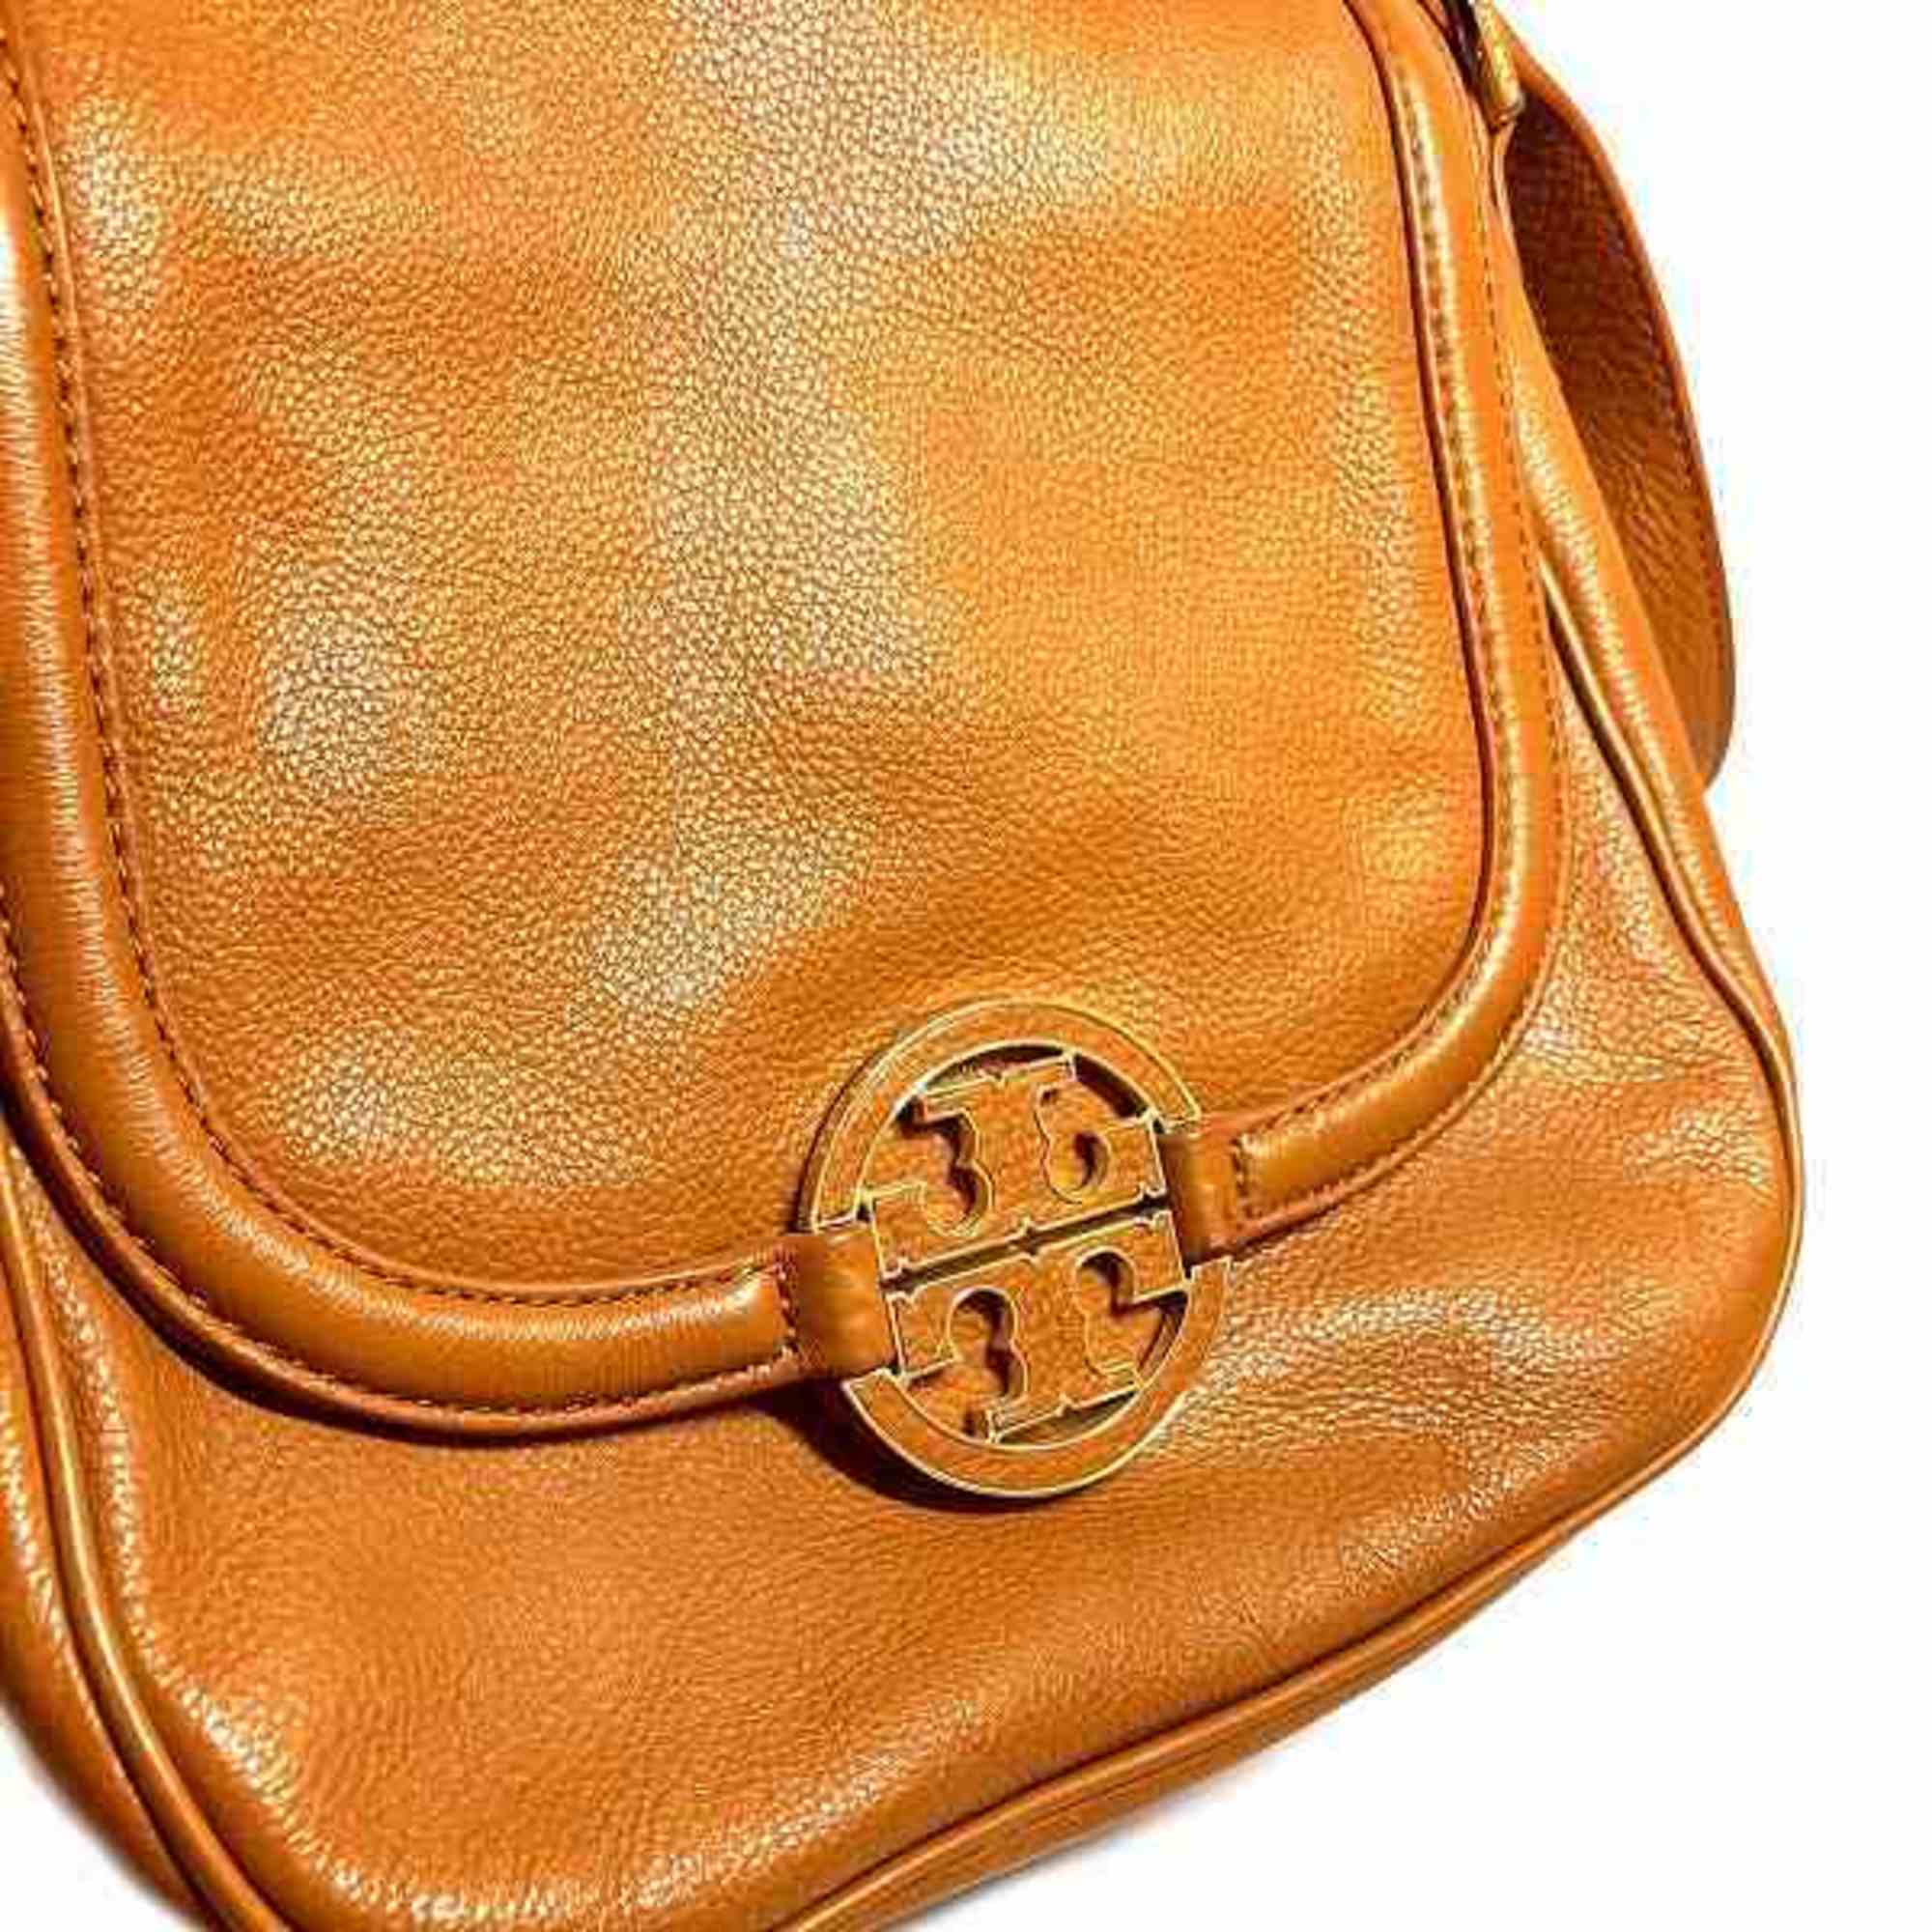 Tory Burch Brown Leather Bag Shoulder Women's